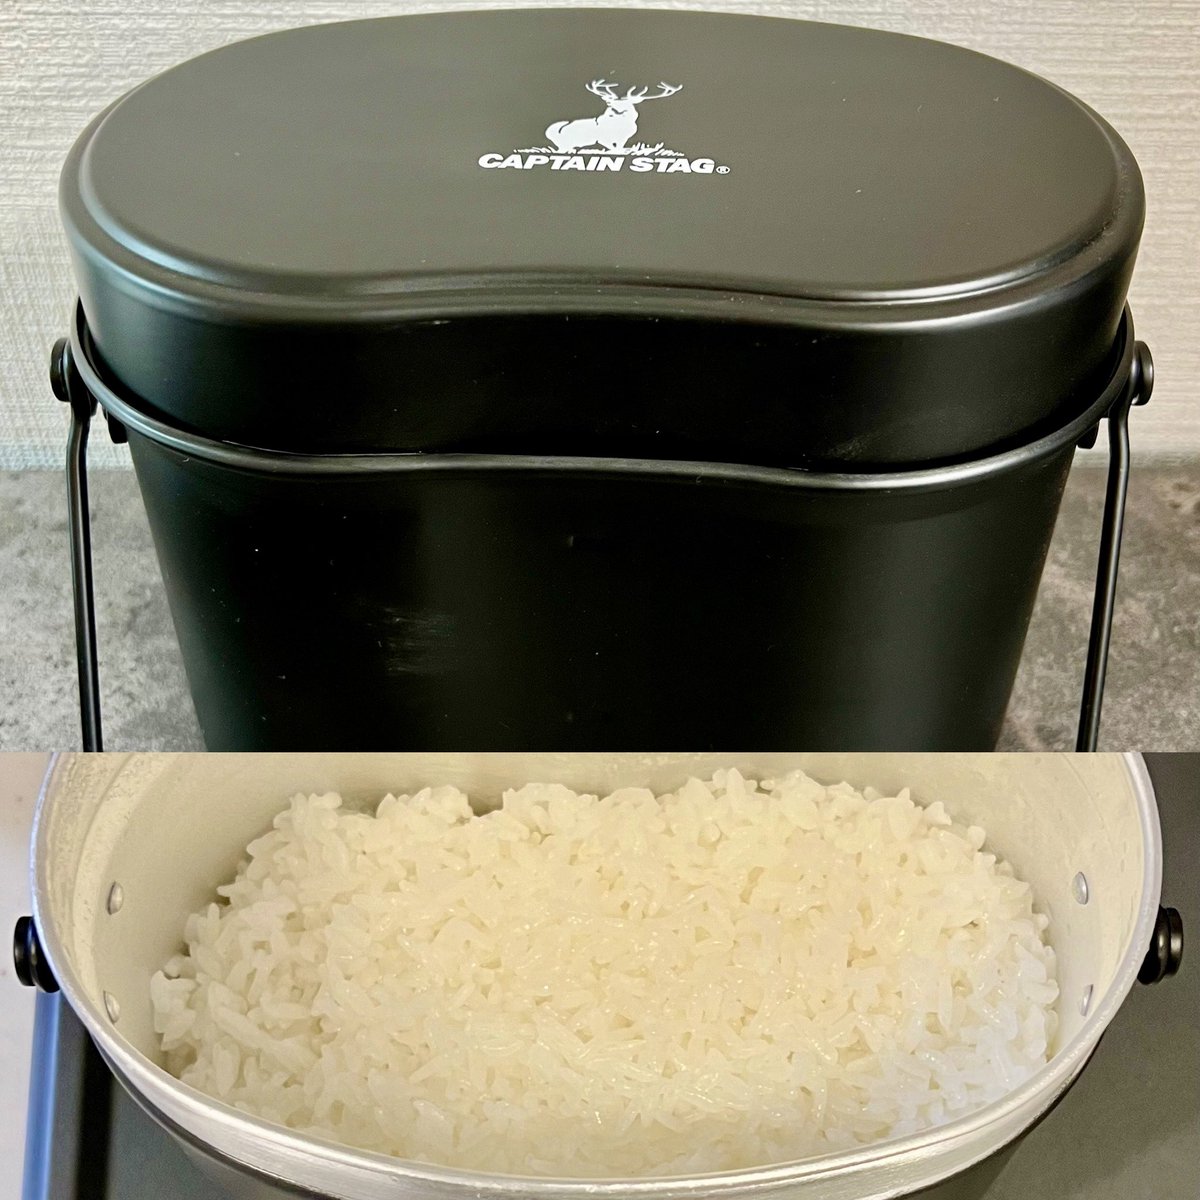 #Rice cooked in a #messtin was very tasty 🍚